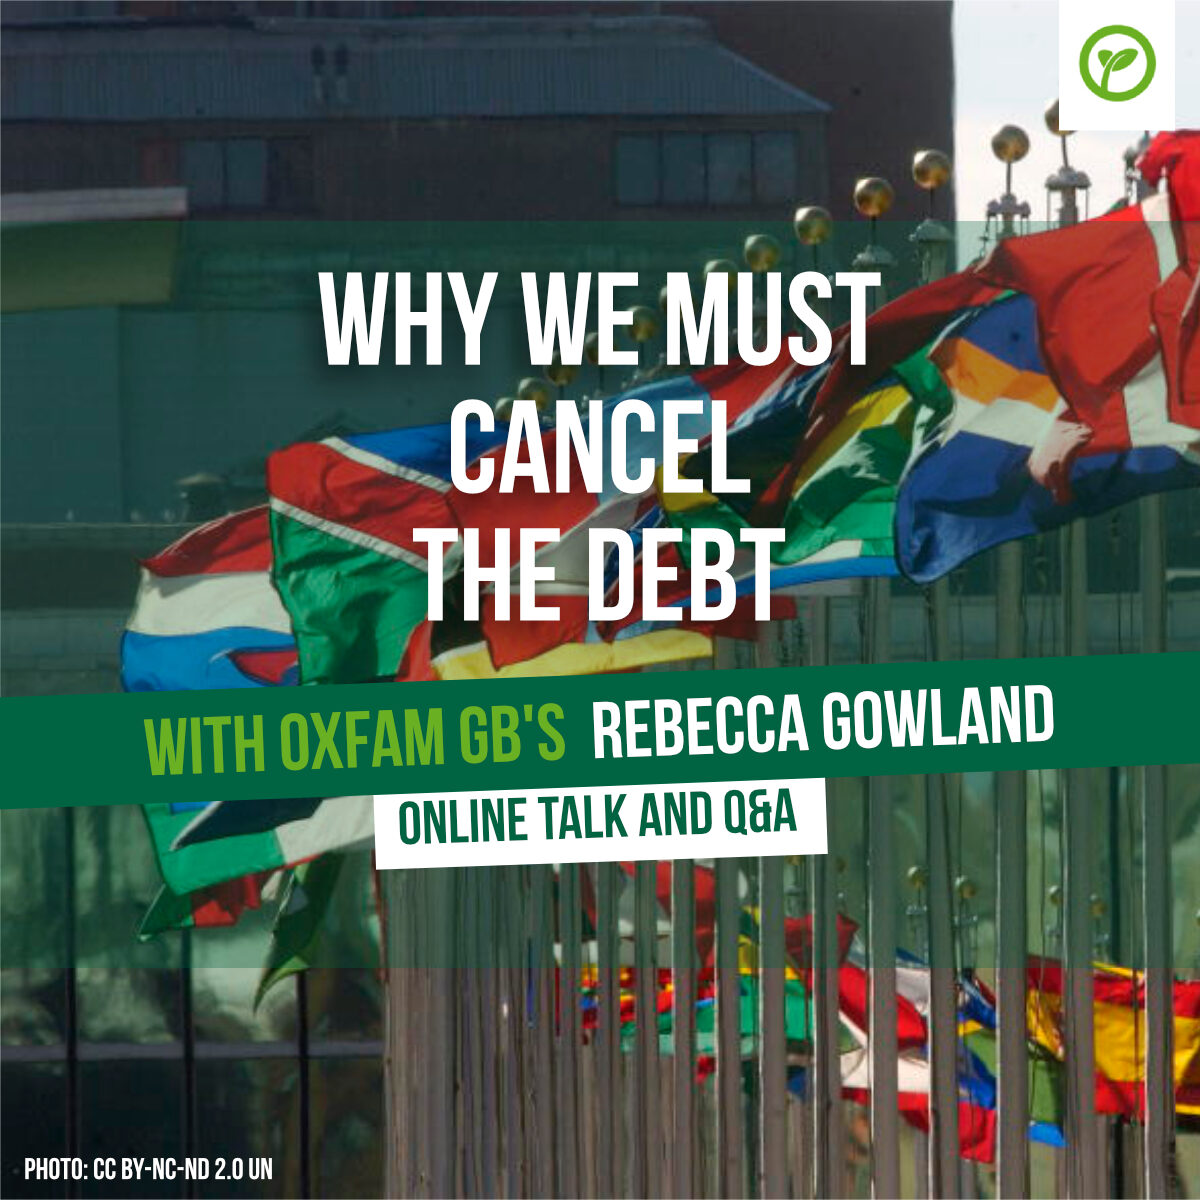 Why We Must Cancel the Debt. With Oxfam GB's Rebecca Gowland. Online talk and Q&A. Photo CC BY-NC-ND 2.0 UN